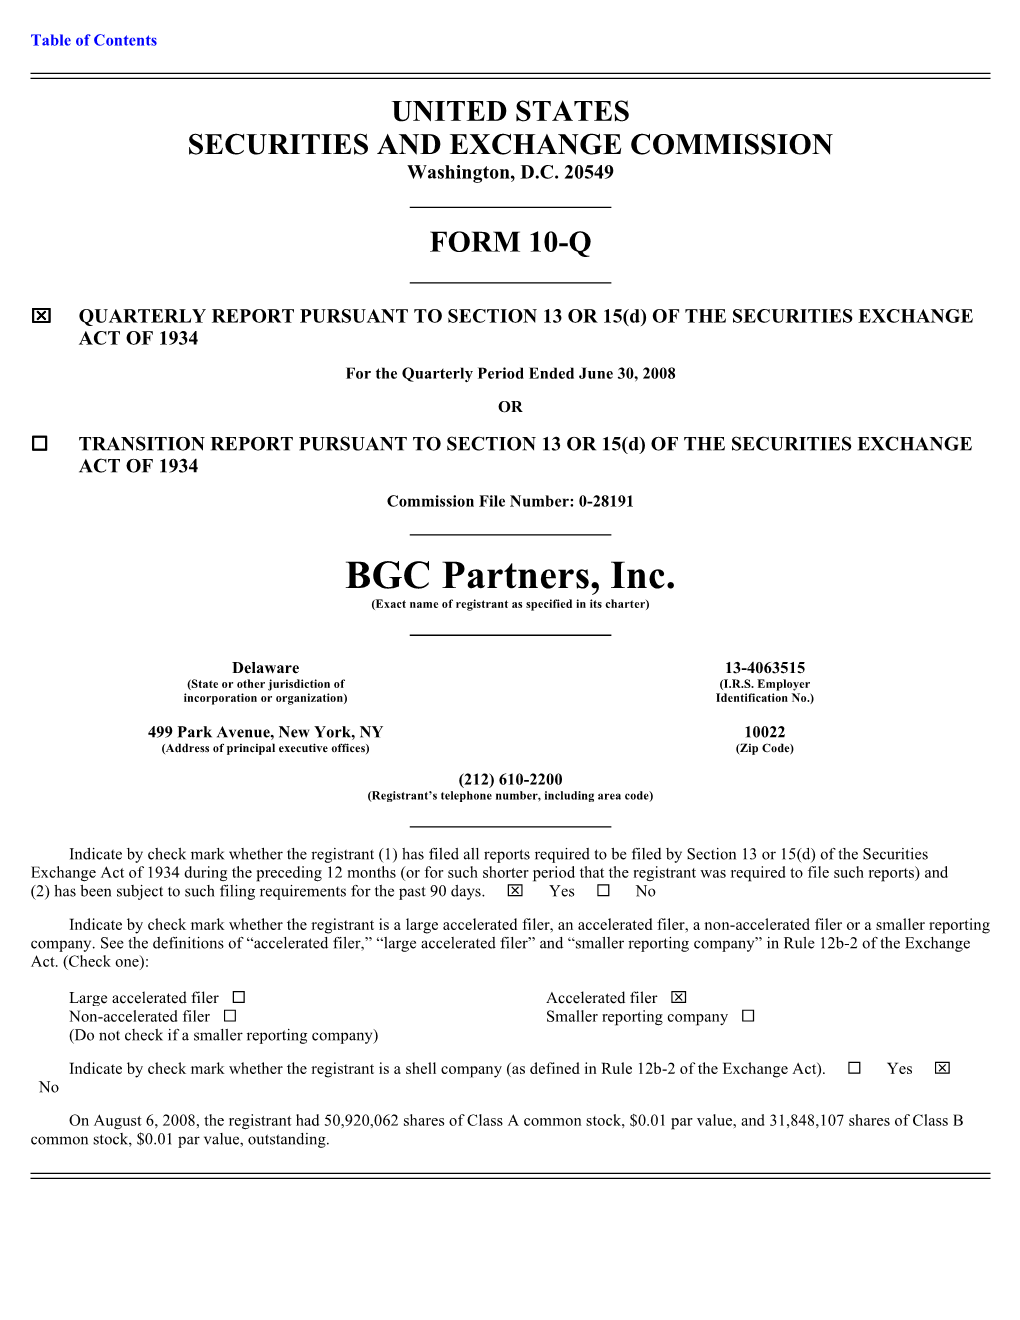 BGC Partners, Inc. (Exact Name of Registrant As Specified in Its Charter)